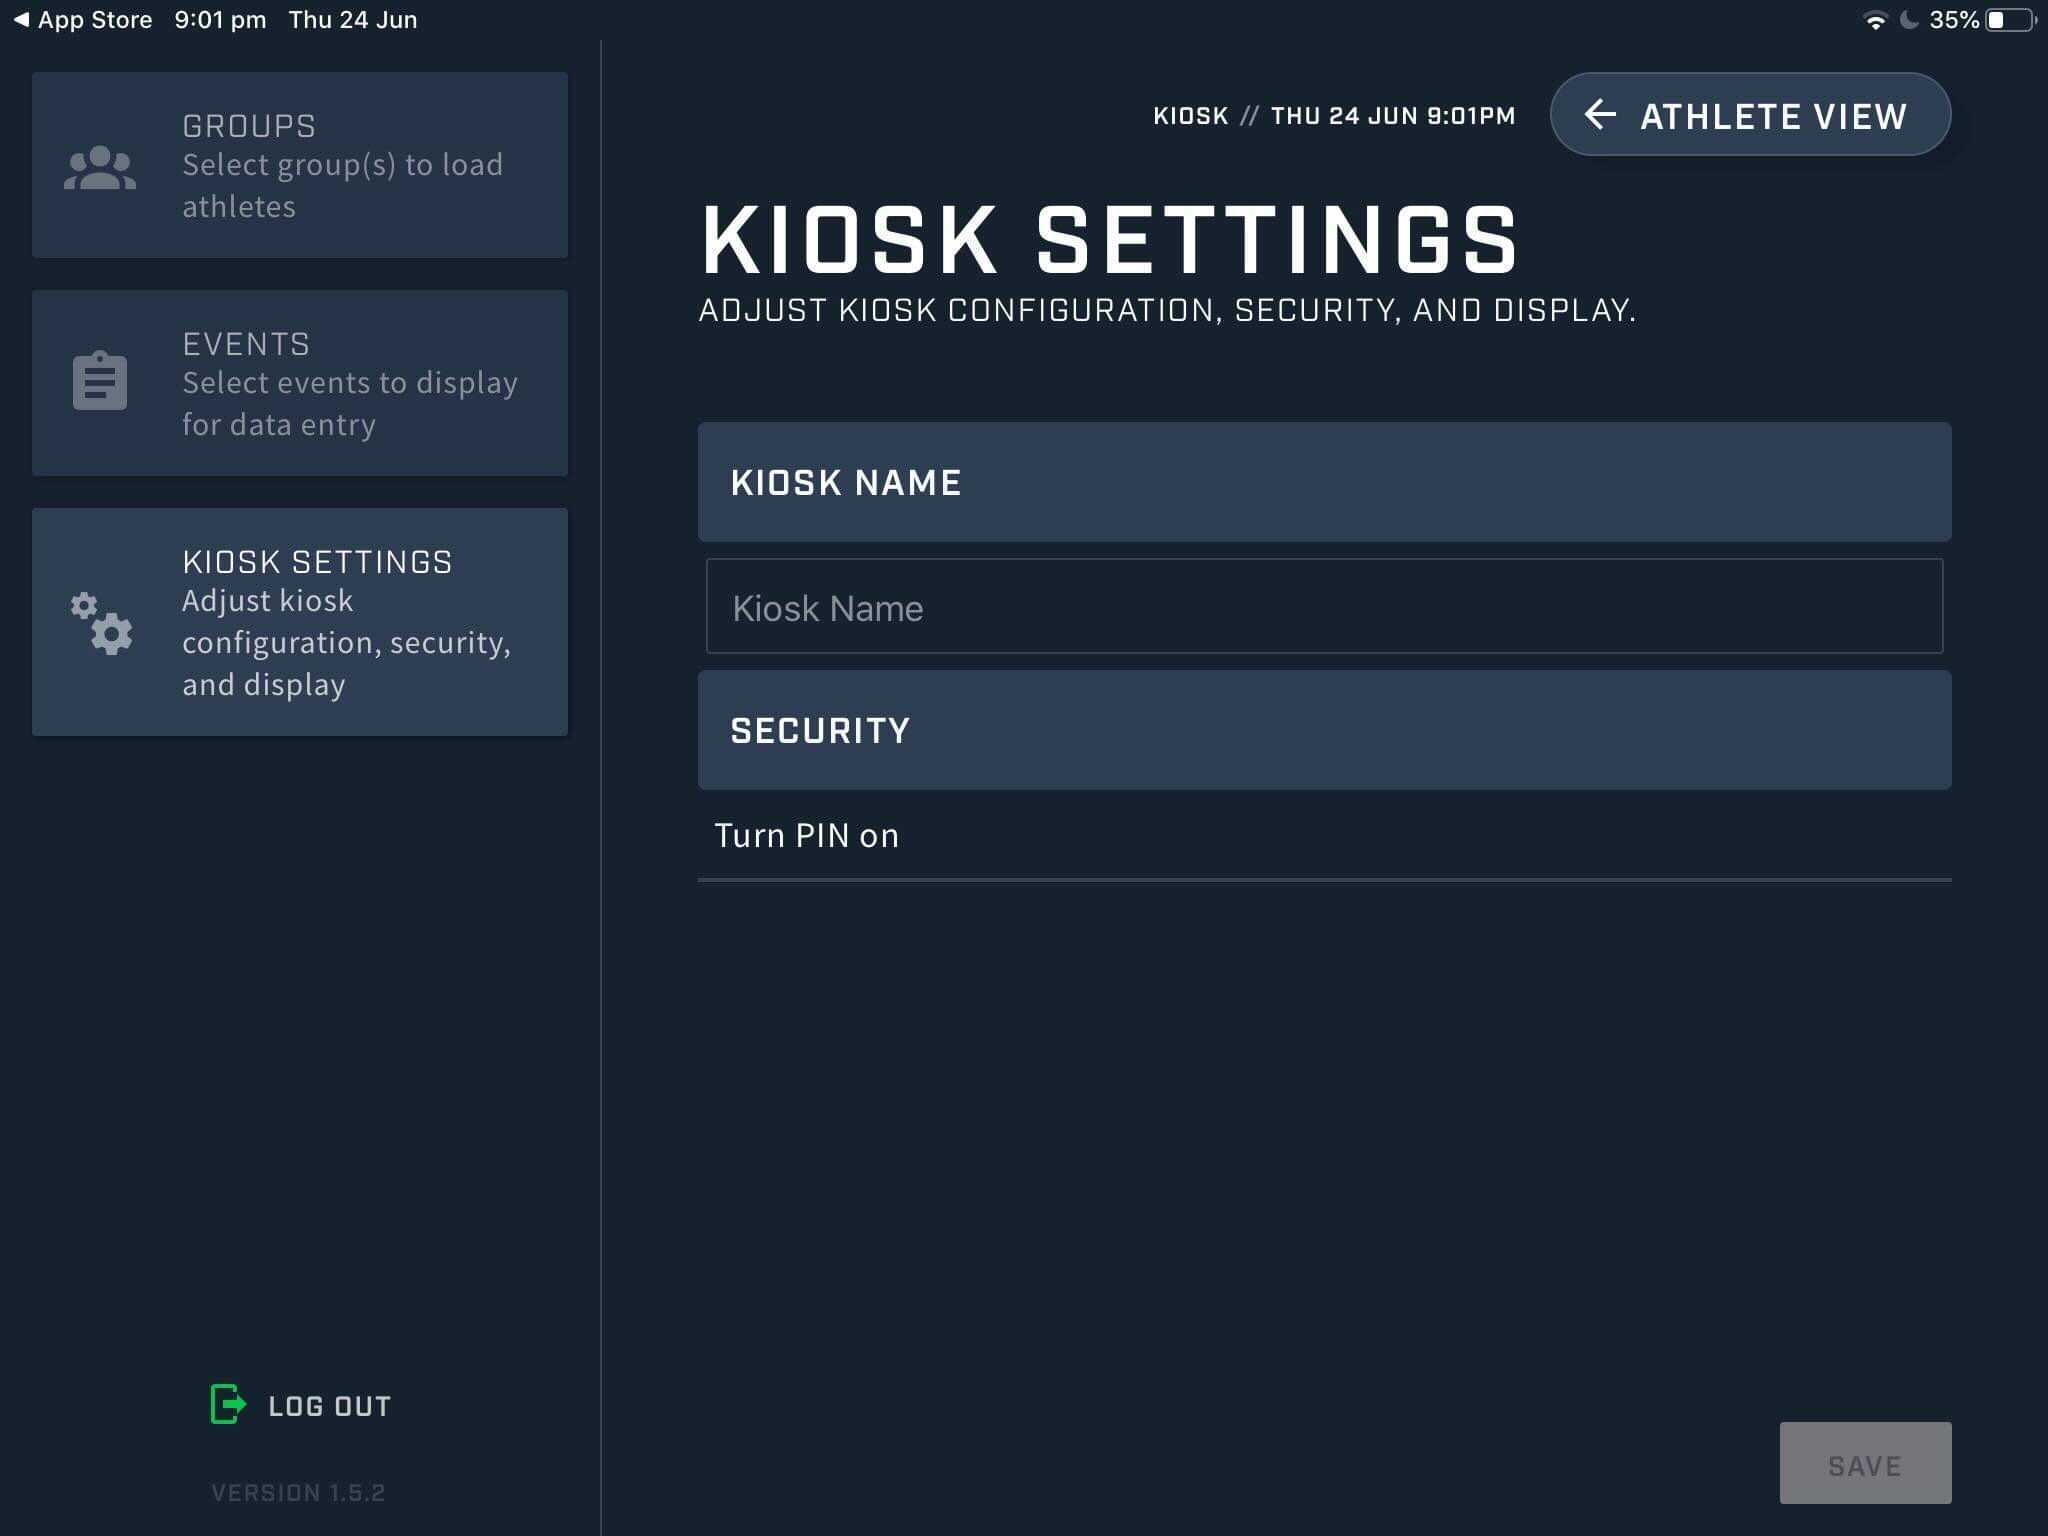 A screenshot of the Settings page on the Kiosk app